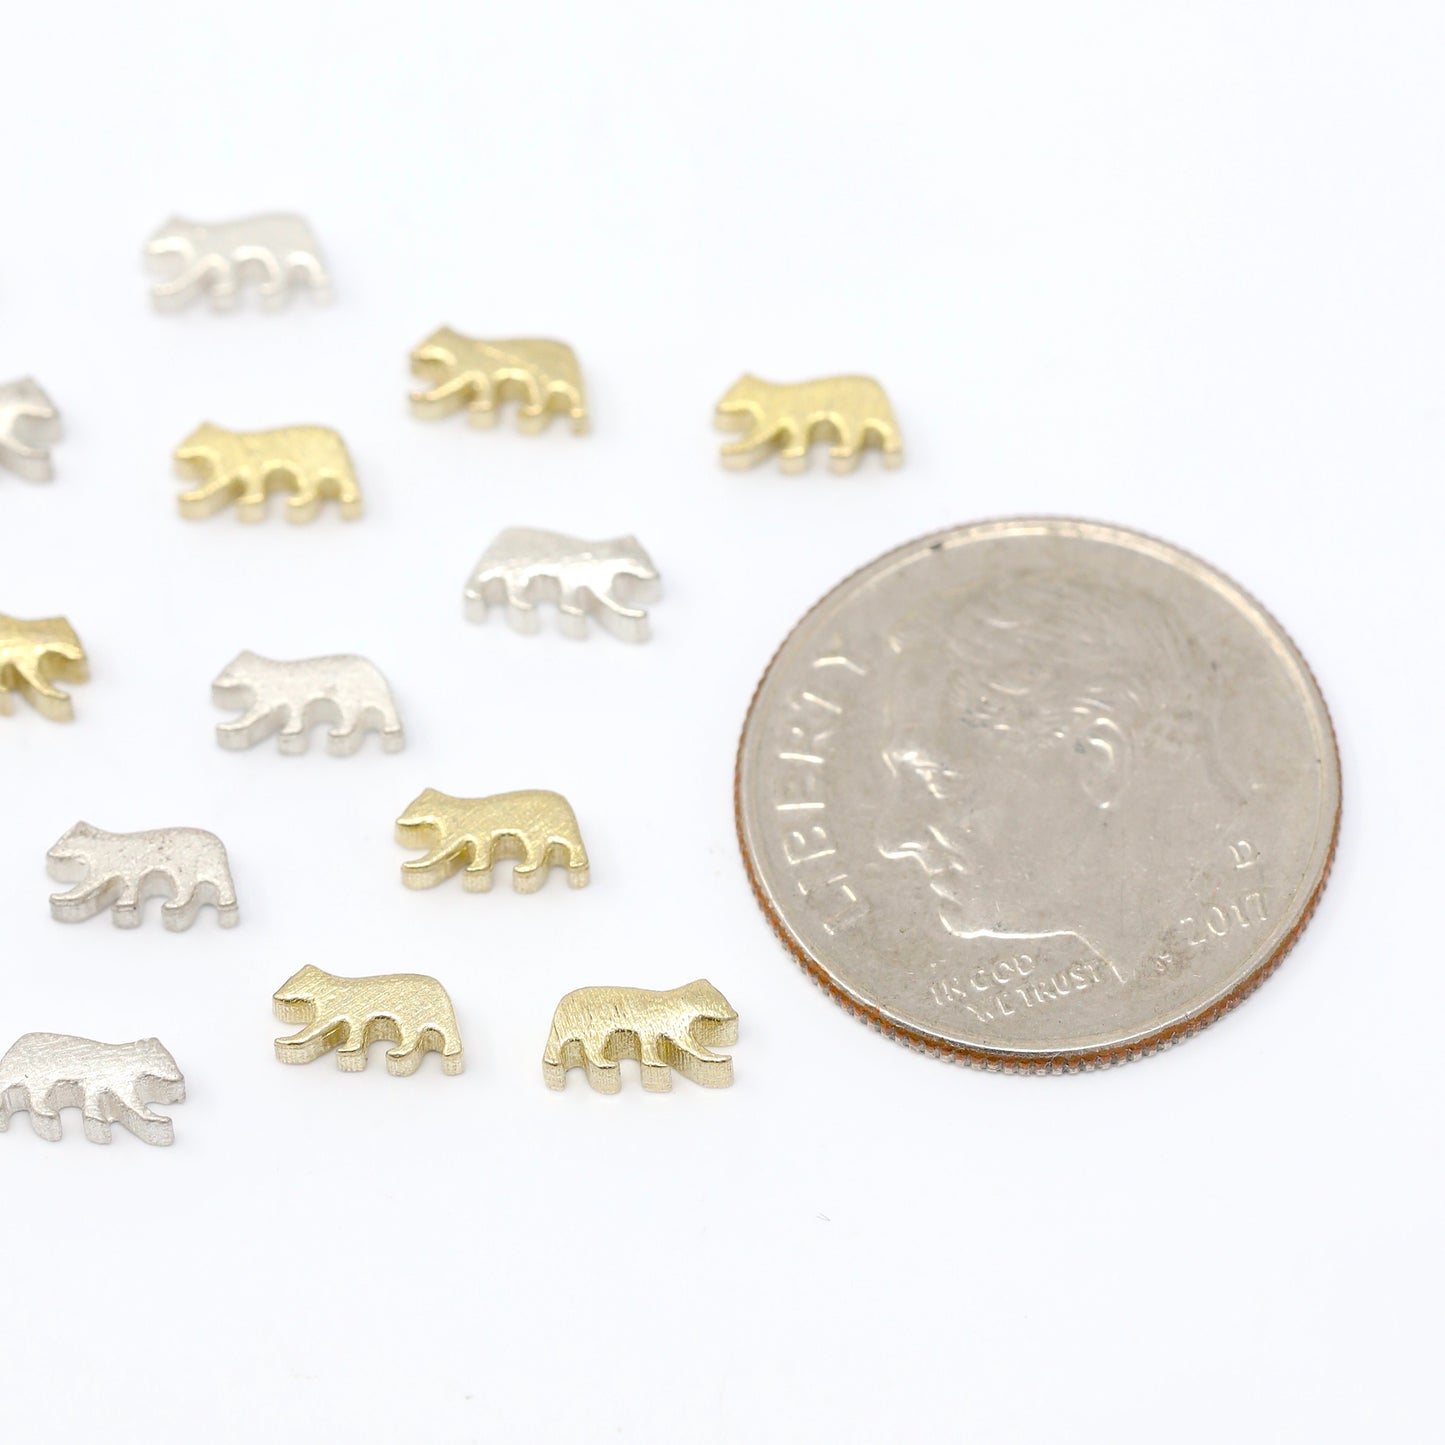 SALE Baby Bear Cub Accent Charm Embellishments for Soldering or Jewelry Making